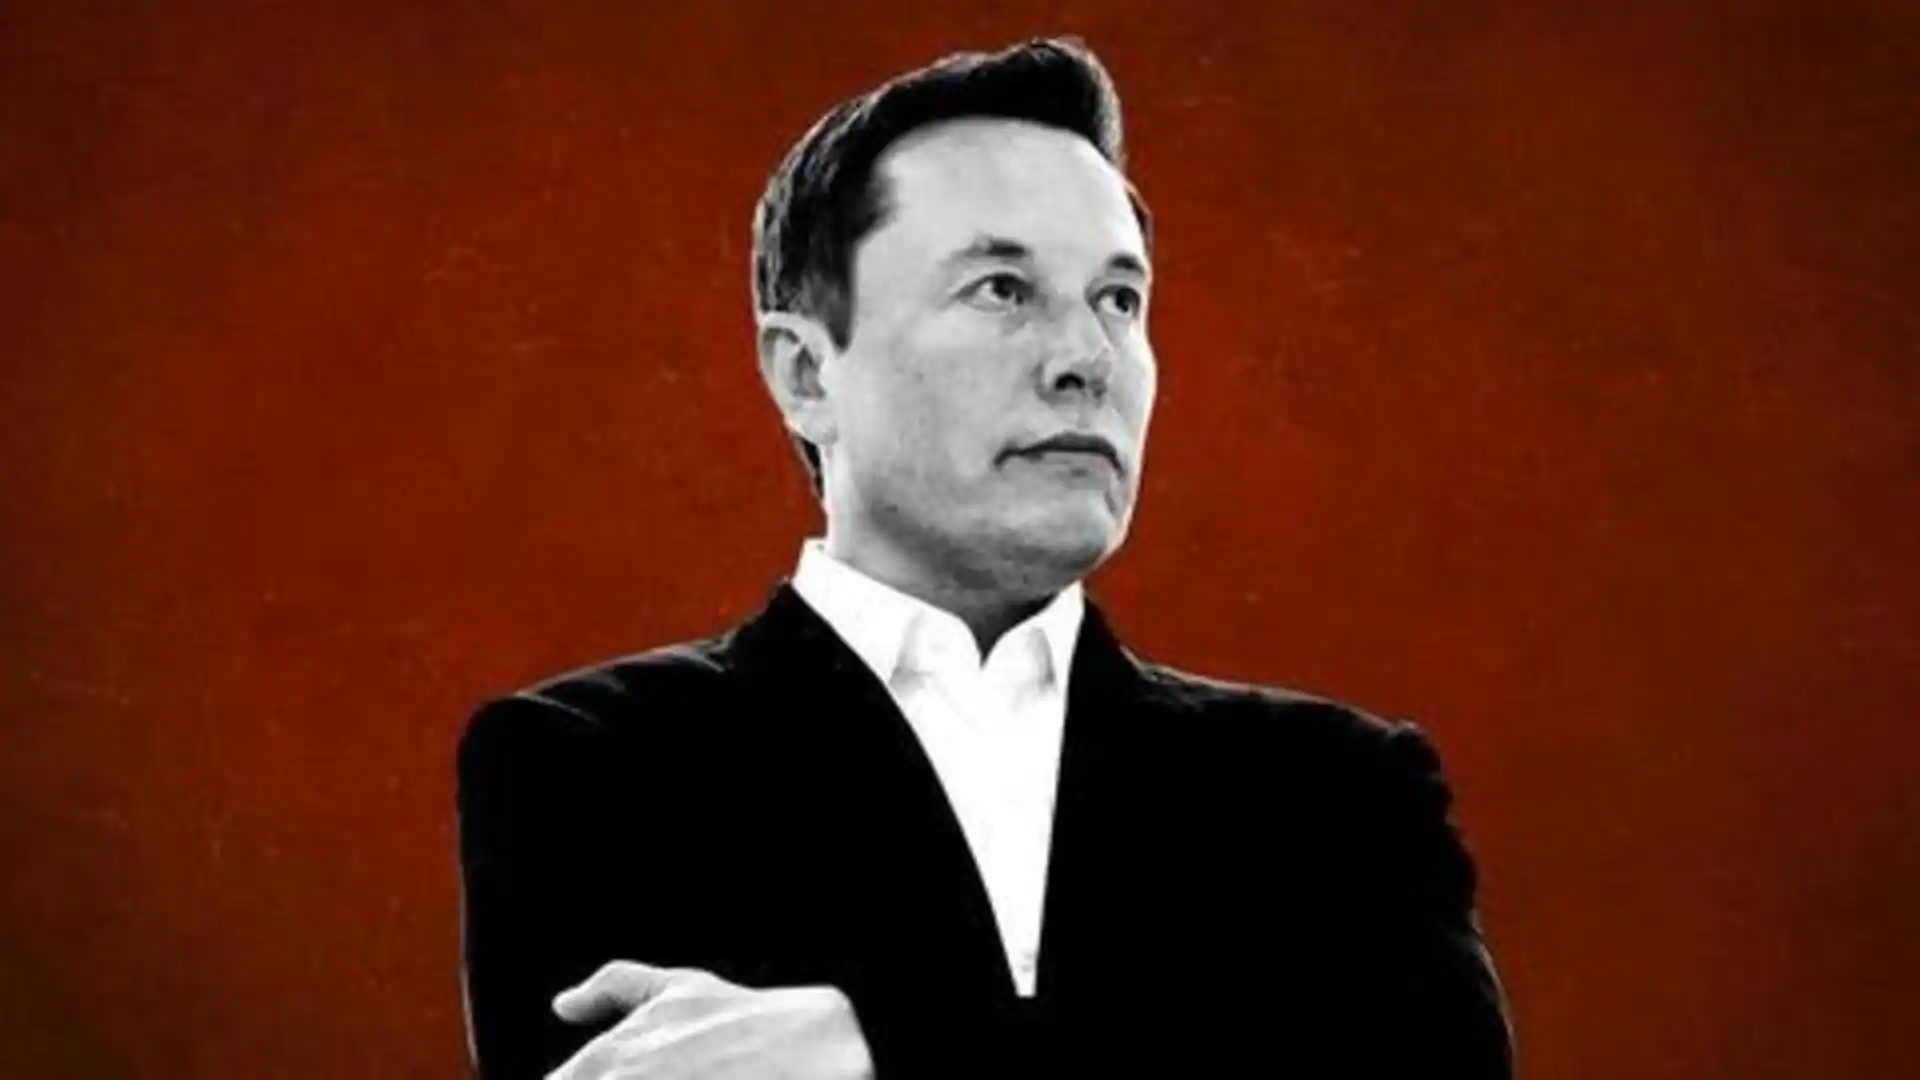 Elon Musk Faces Lawsuit Over Big Tesla Stock Sale Before Price Drop What You Need to Know---